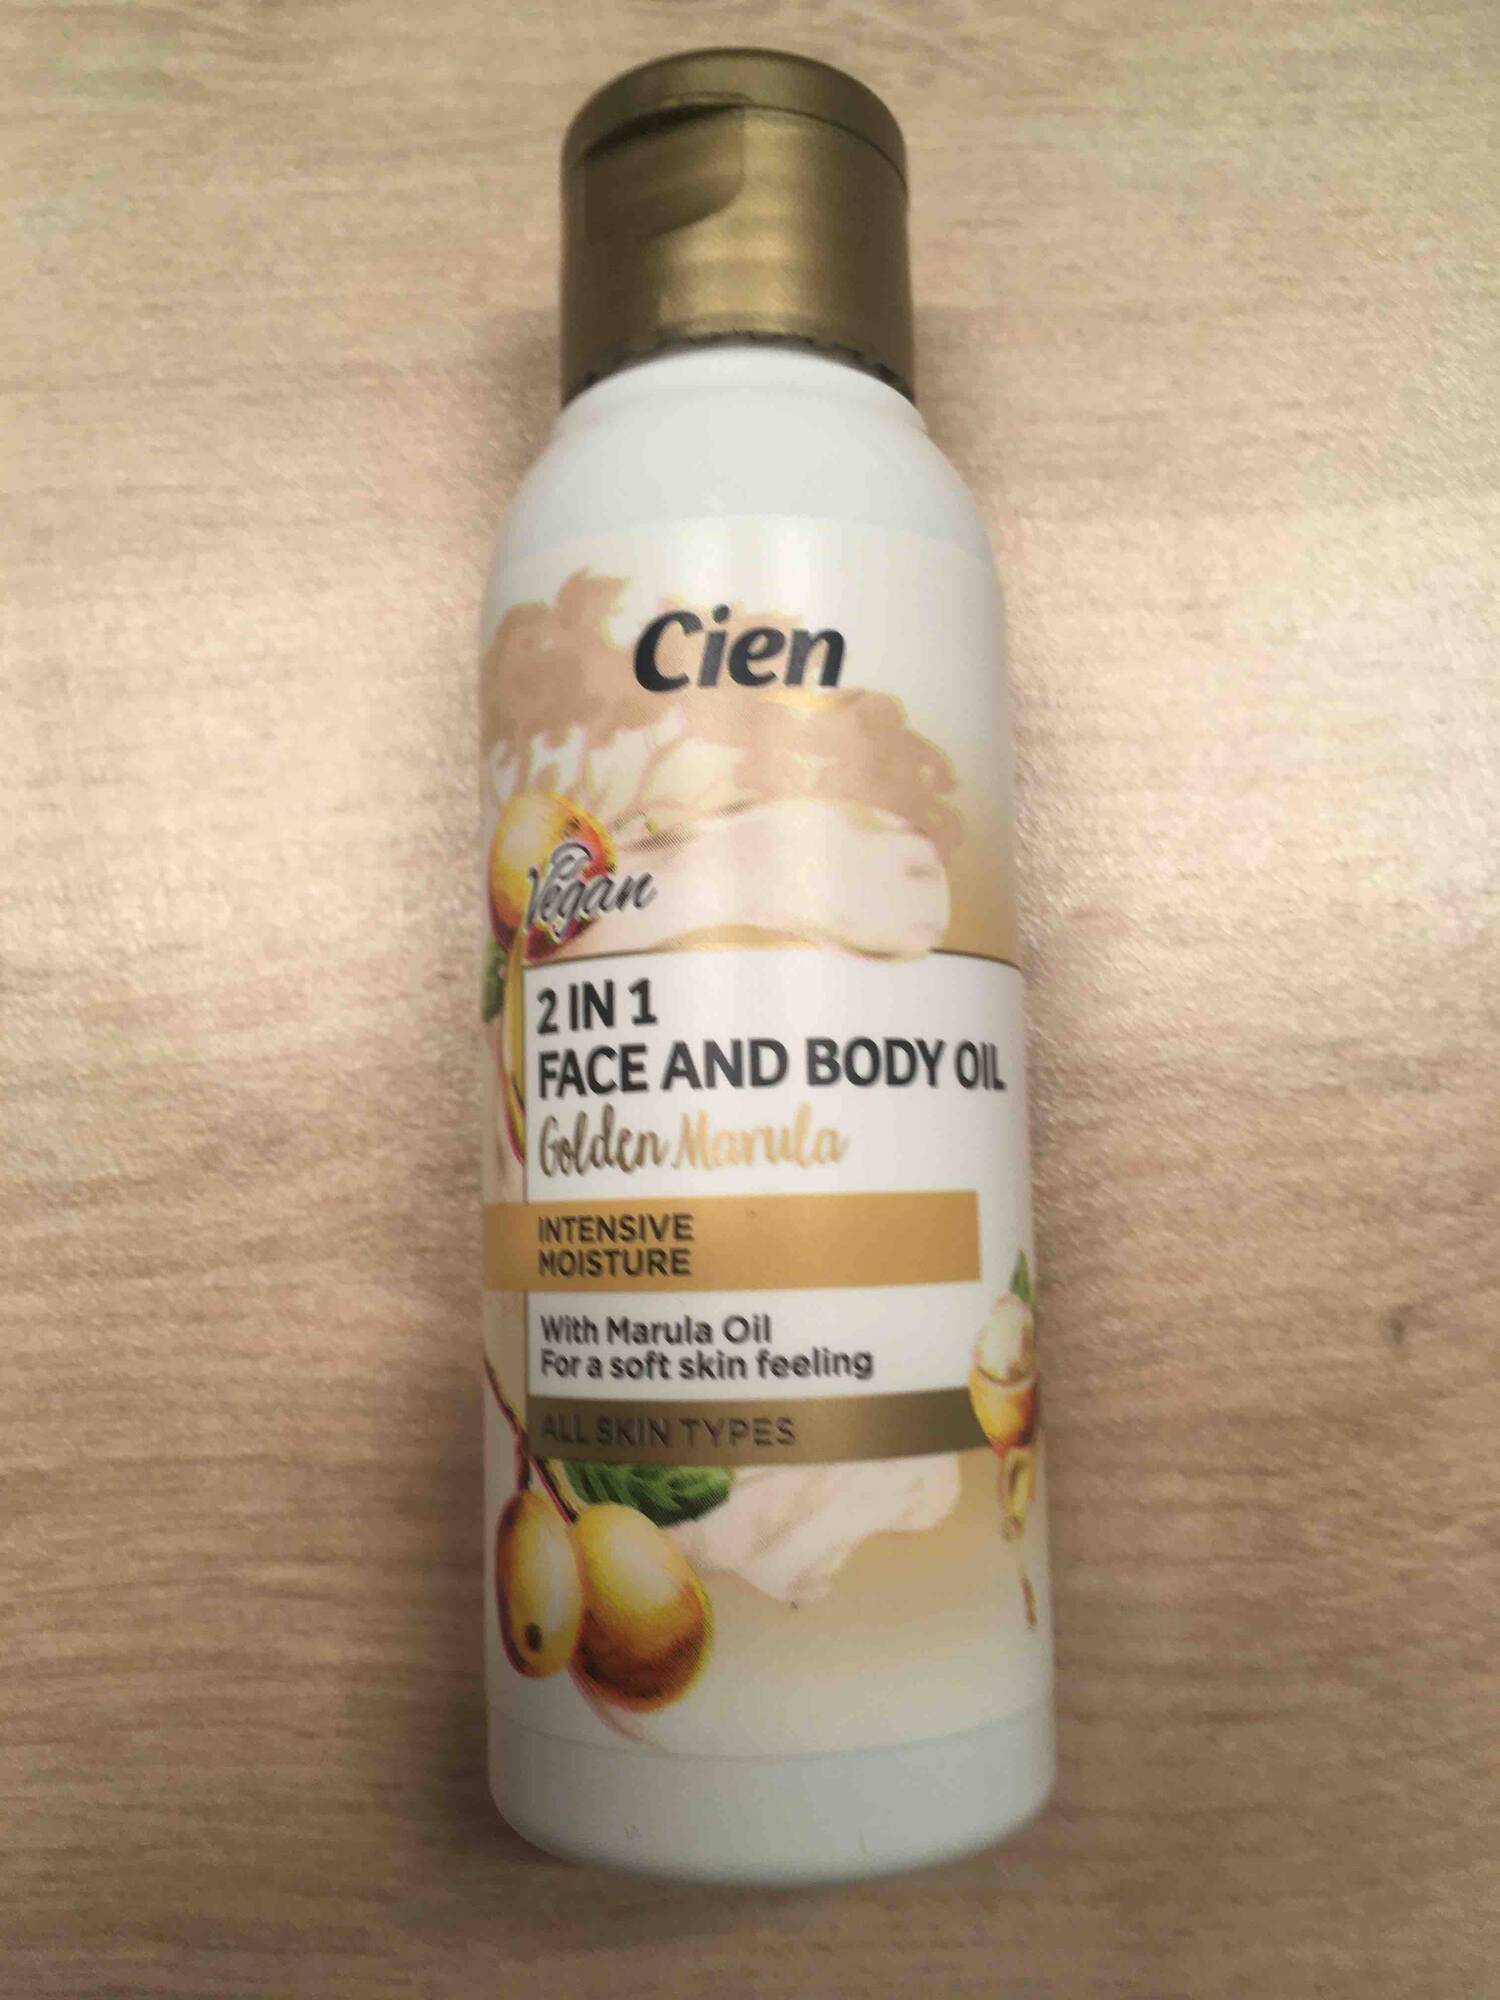 CIEN - Golden marula - 2 in 1 face and body oil